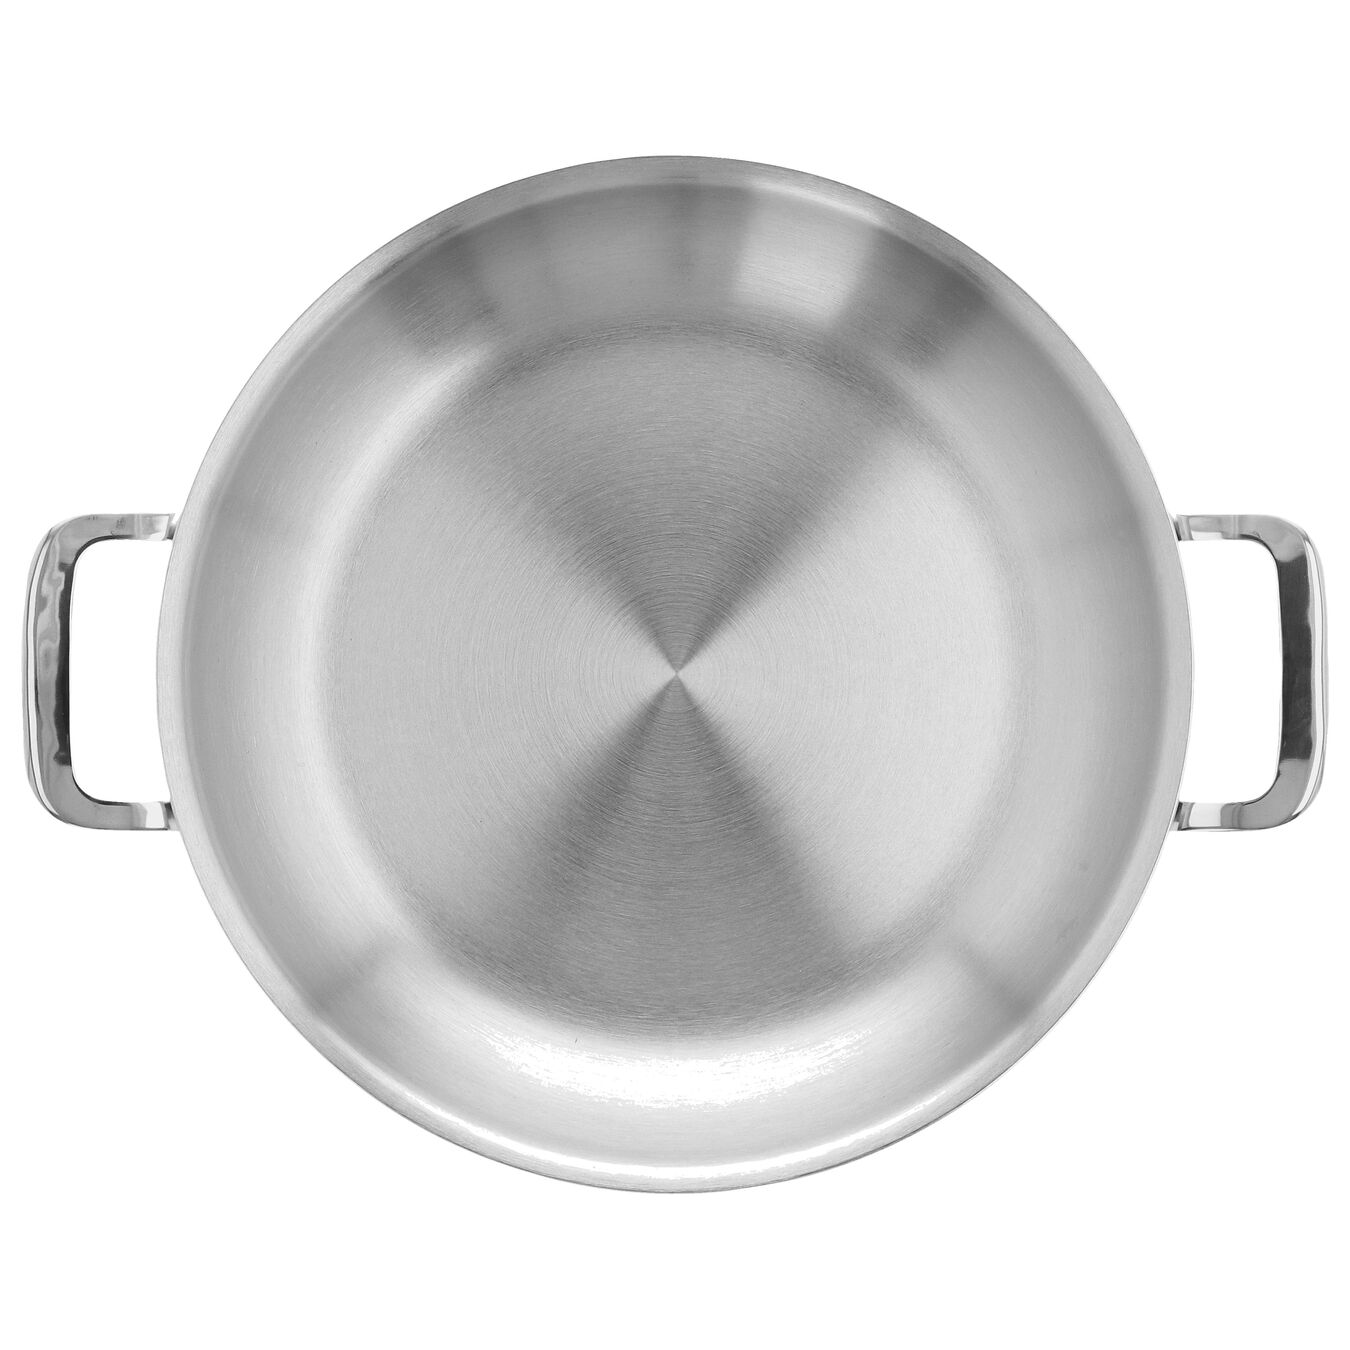 28 cm / 11 inch 18/10 Stainless Steel Frying pan with 2 handles,,large 2